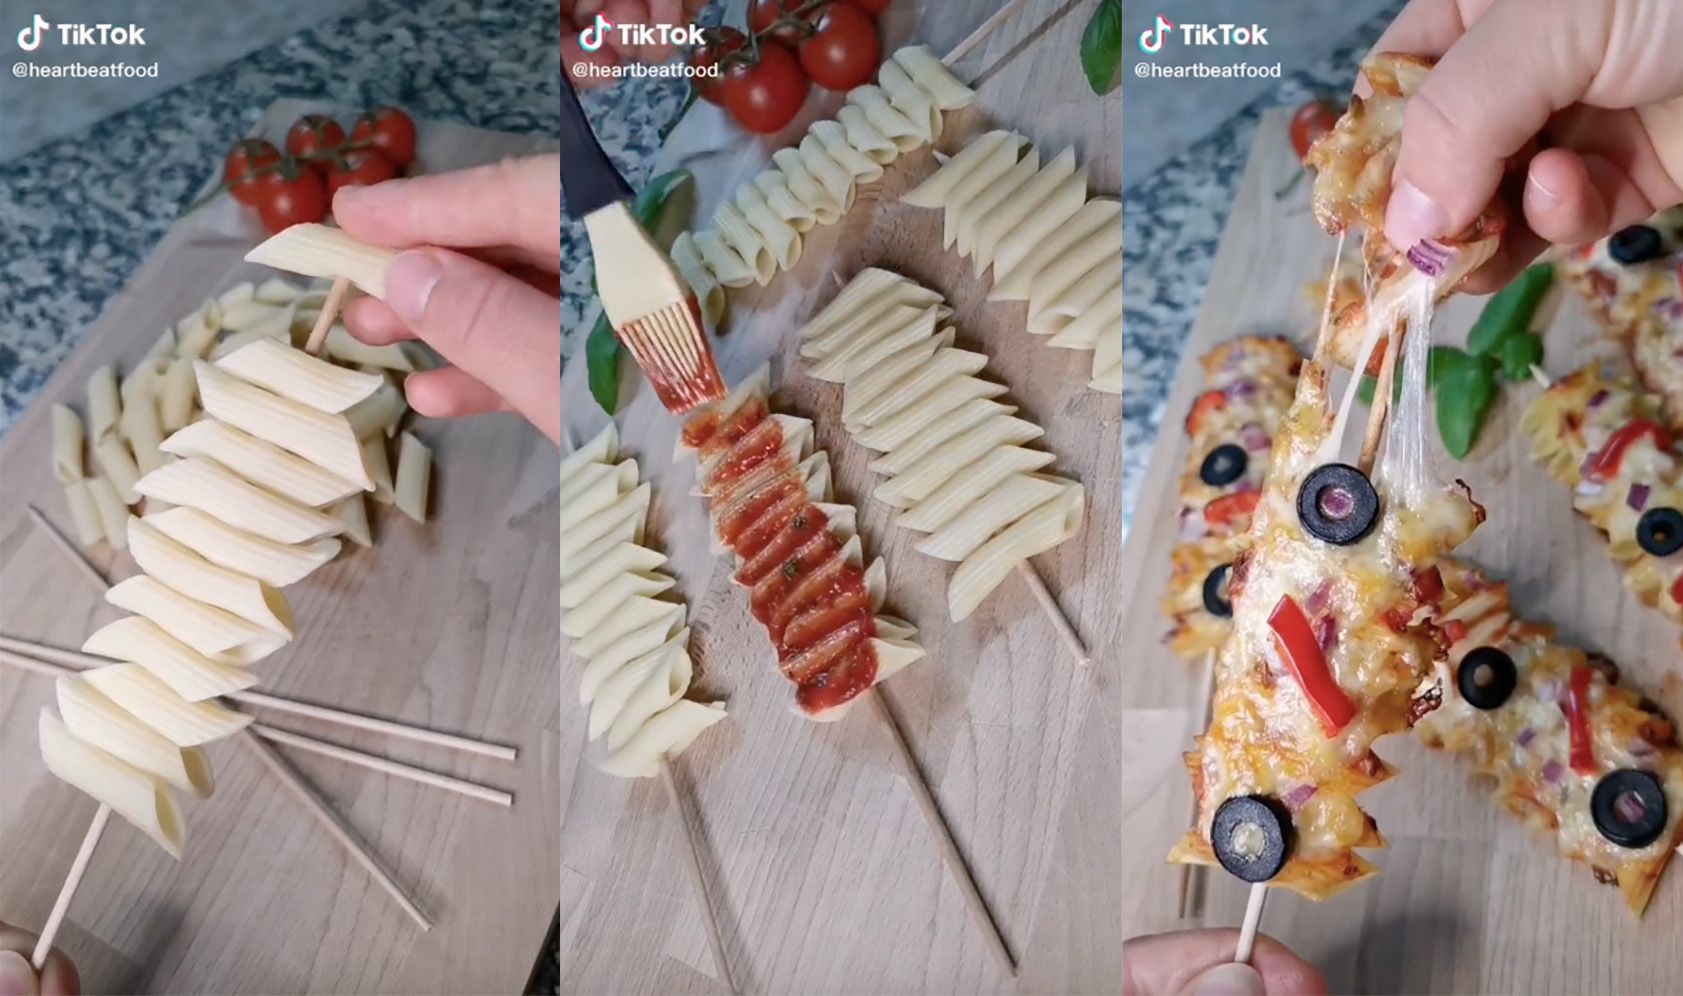 Pasta Skewers Are TikTok's Latest Food Hack, And They Look Delicious